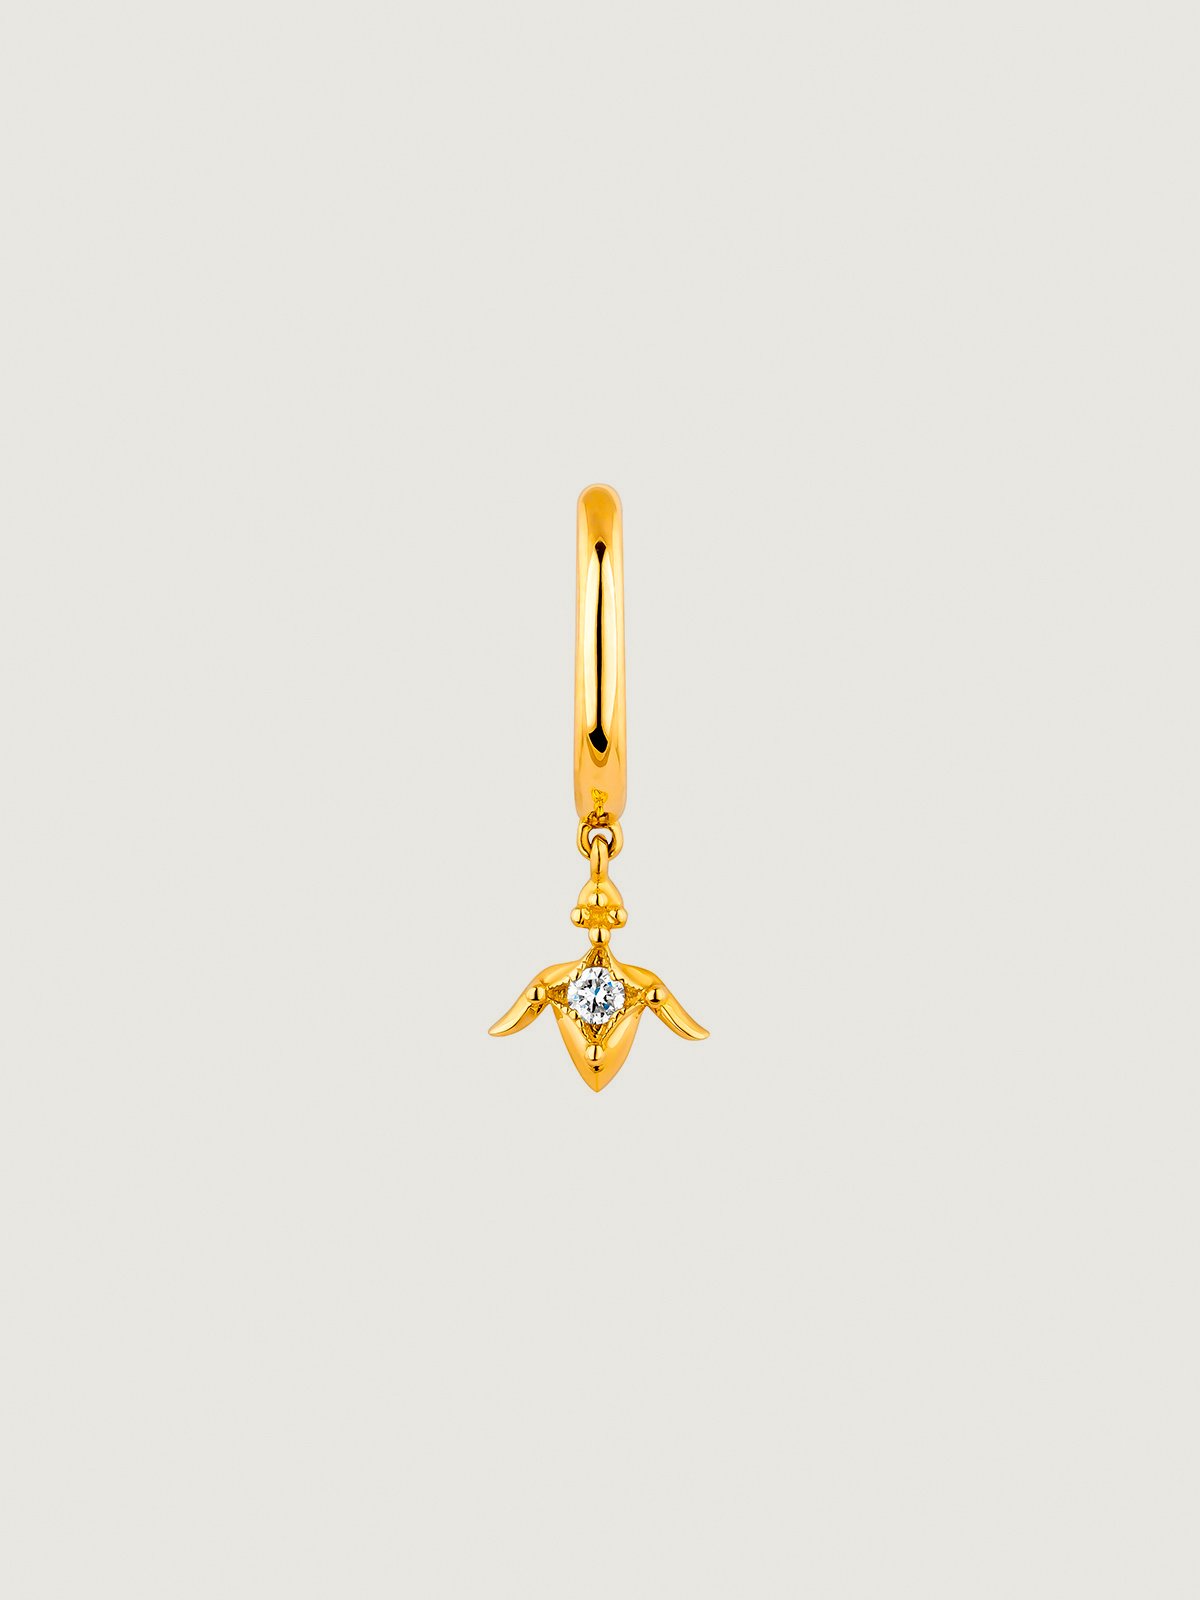 Individual small hoop earring of 9K yellow gold with diamond and lotus flower.